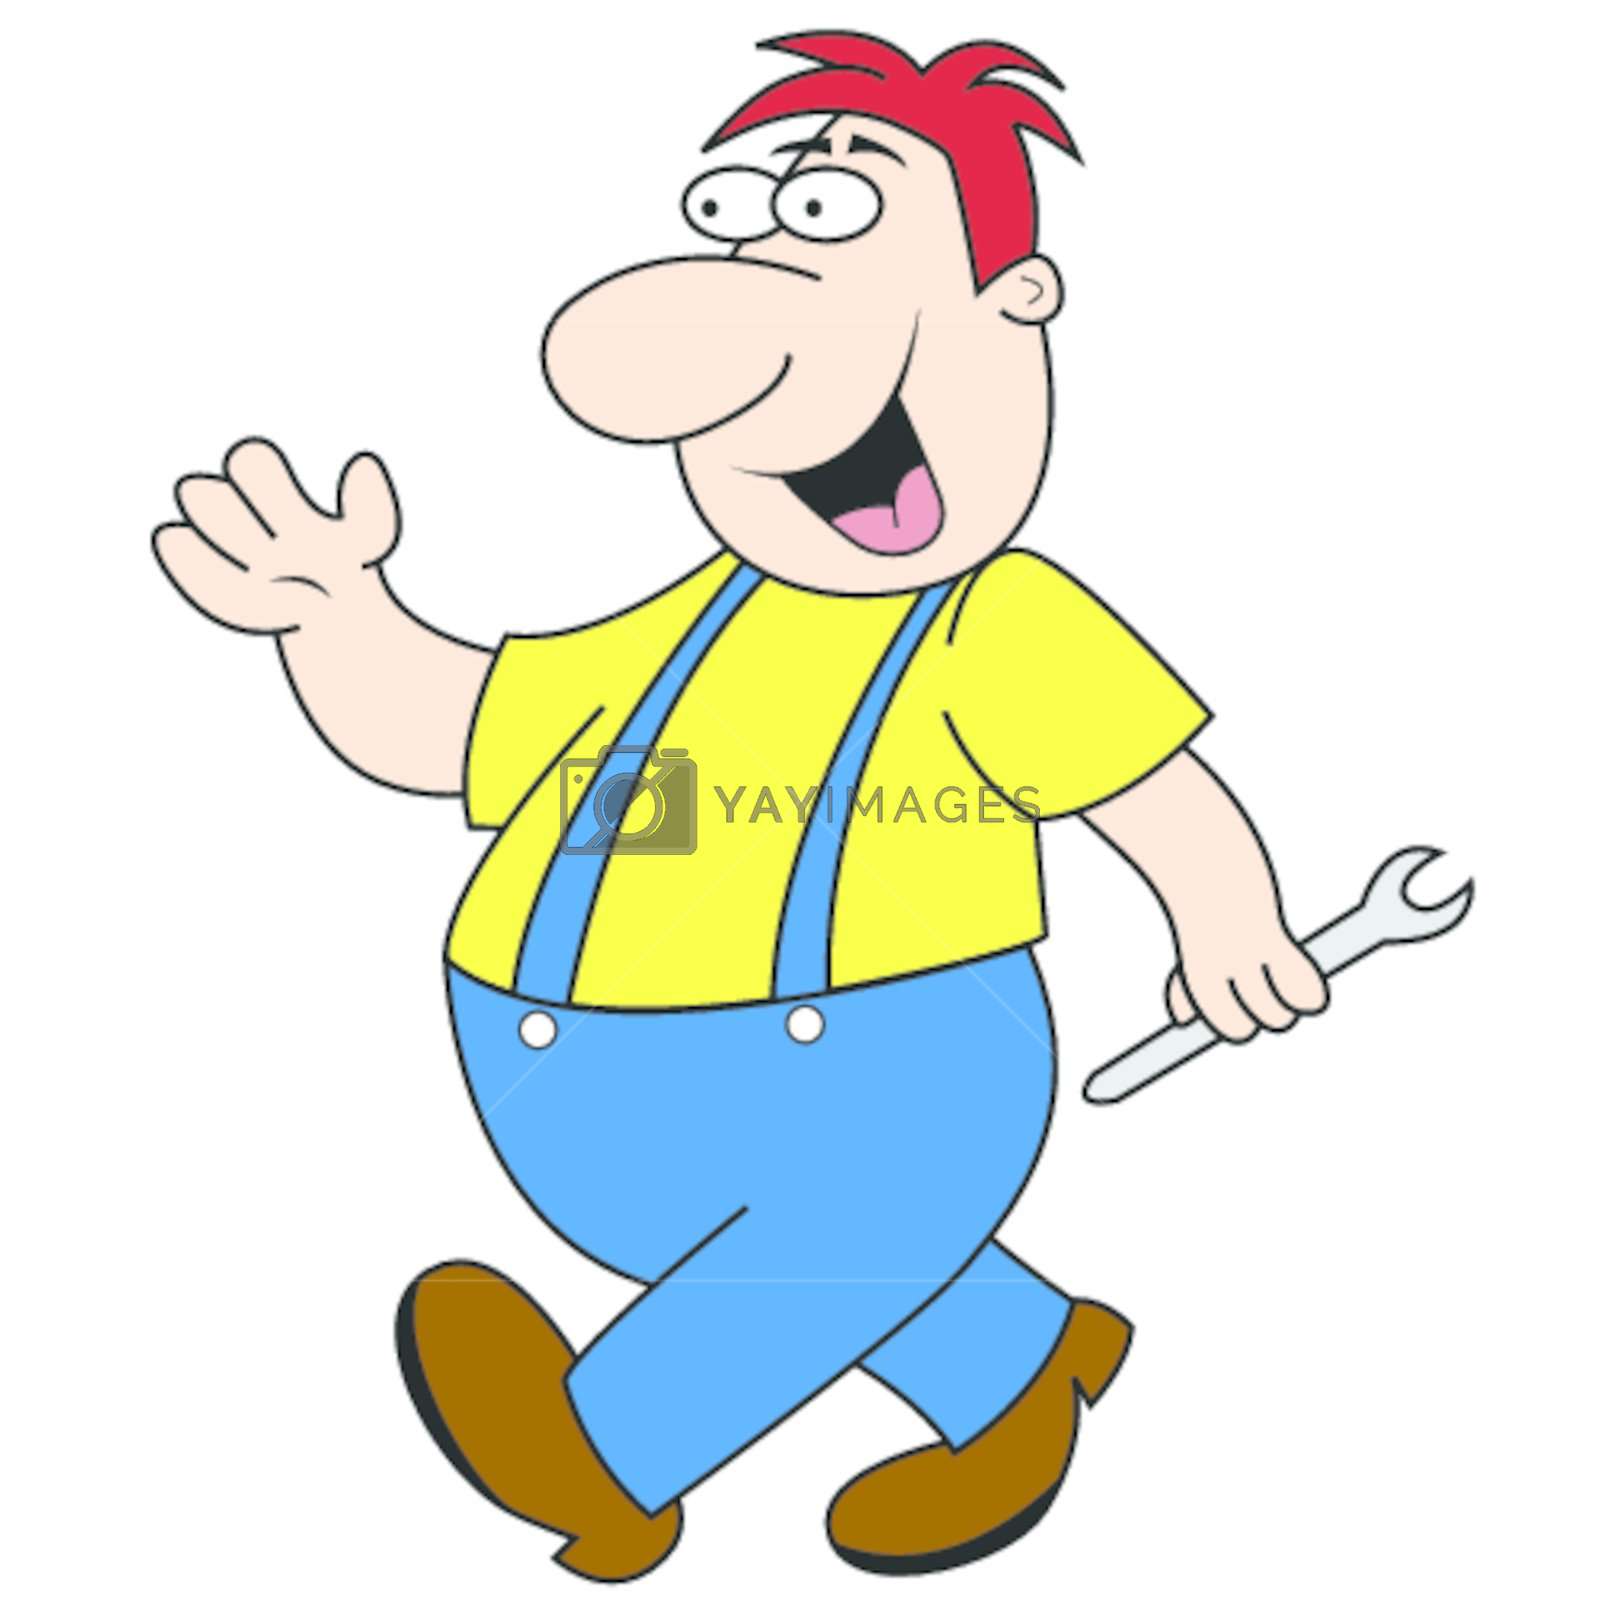 Workman Holding Spanner Cartoon Character Stock Image.